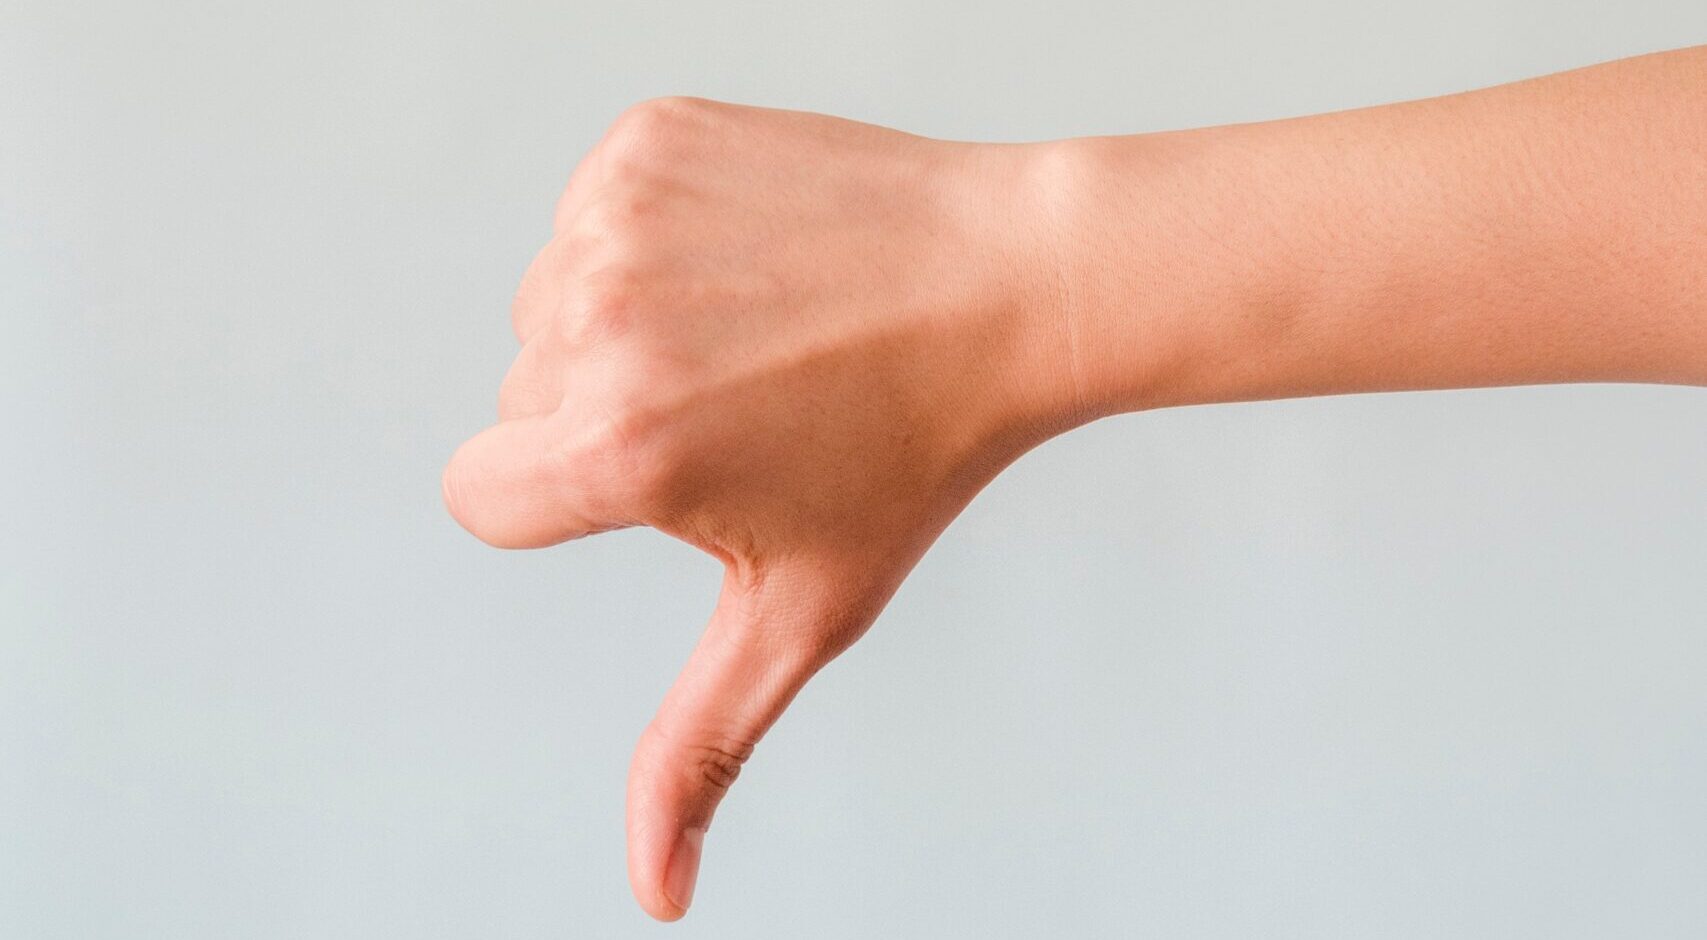 Image of a finger showing thumbs down